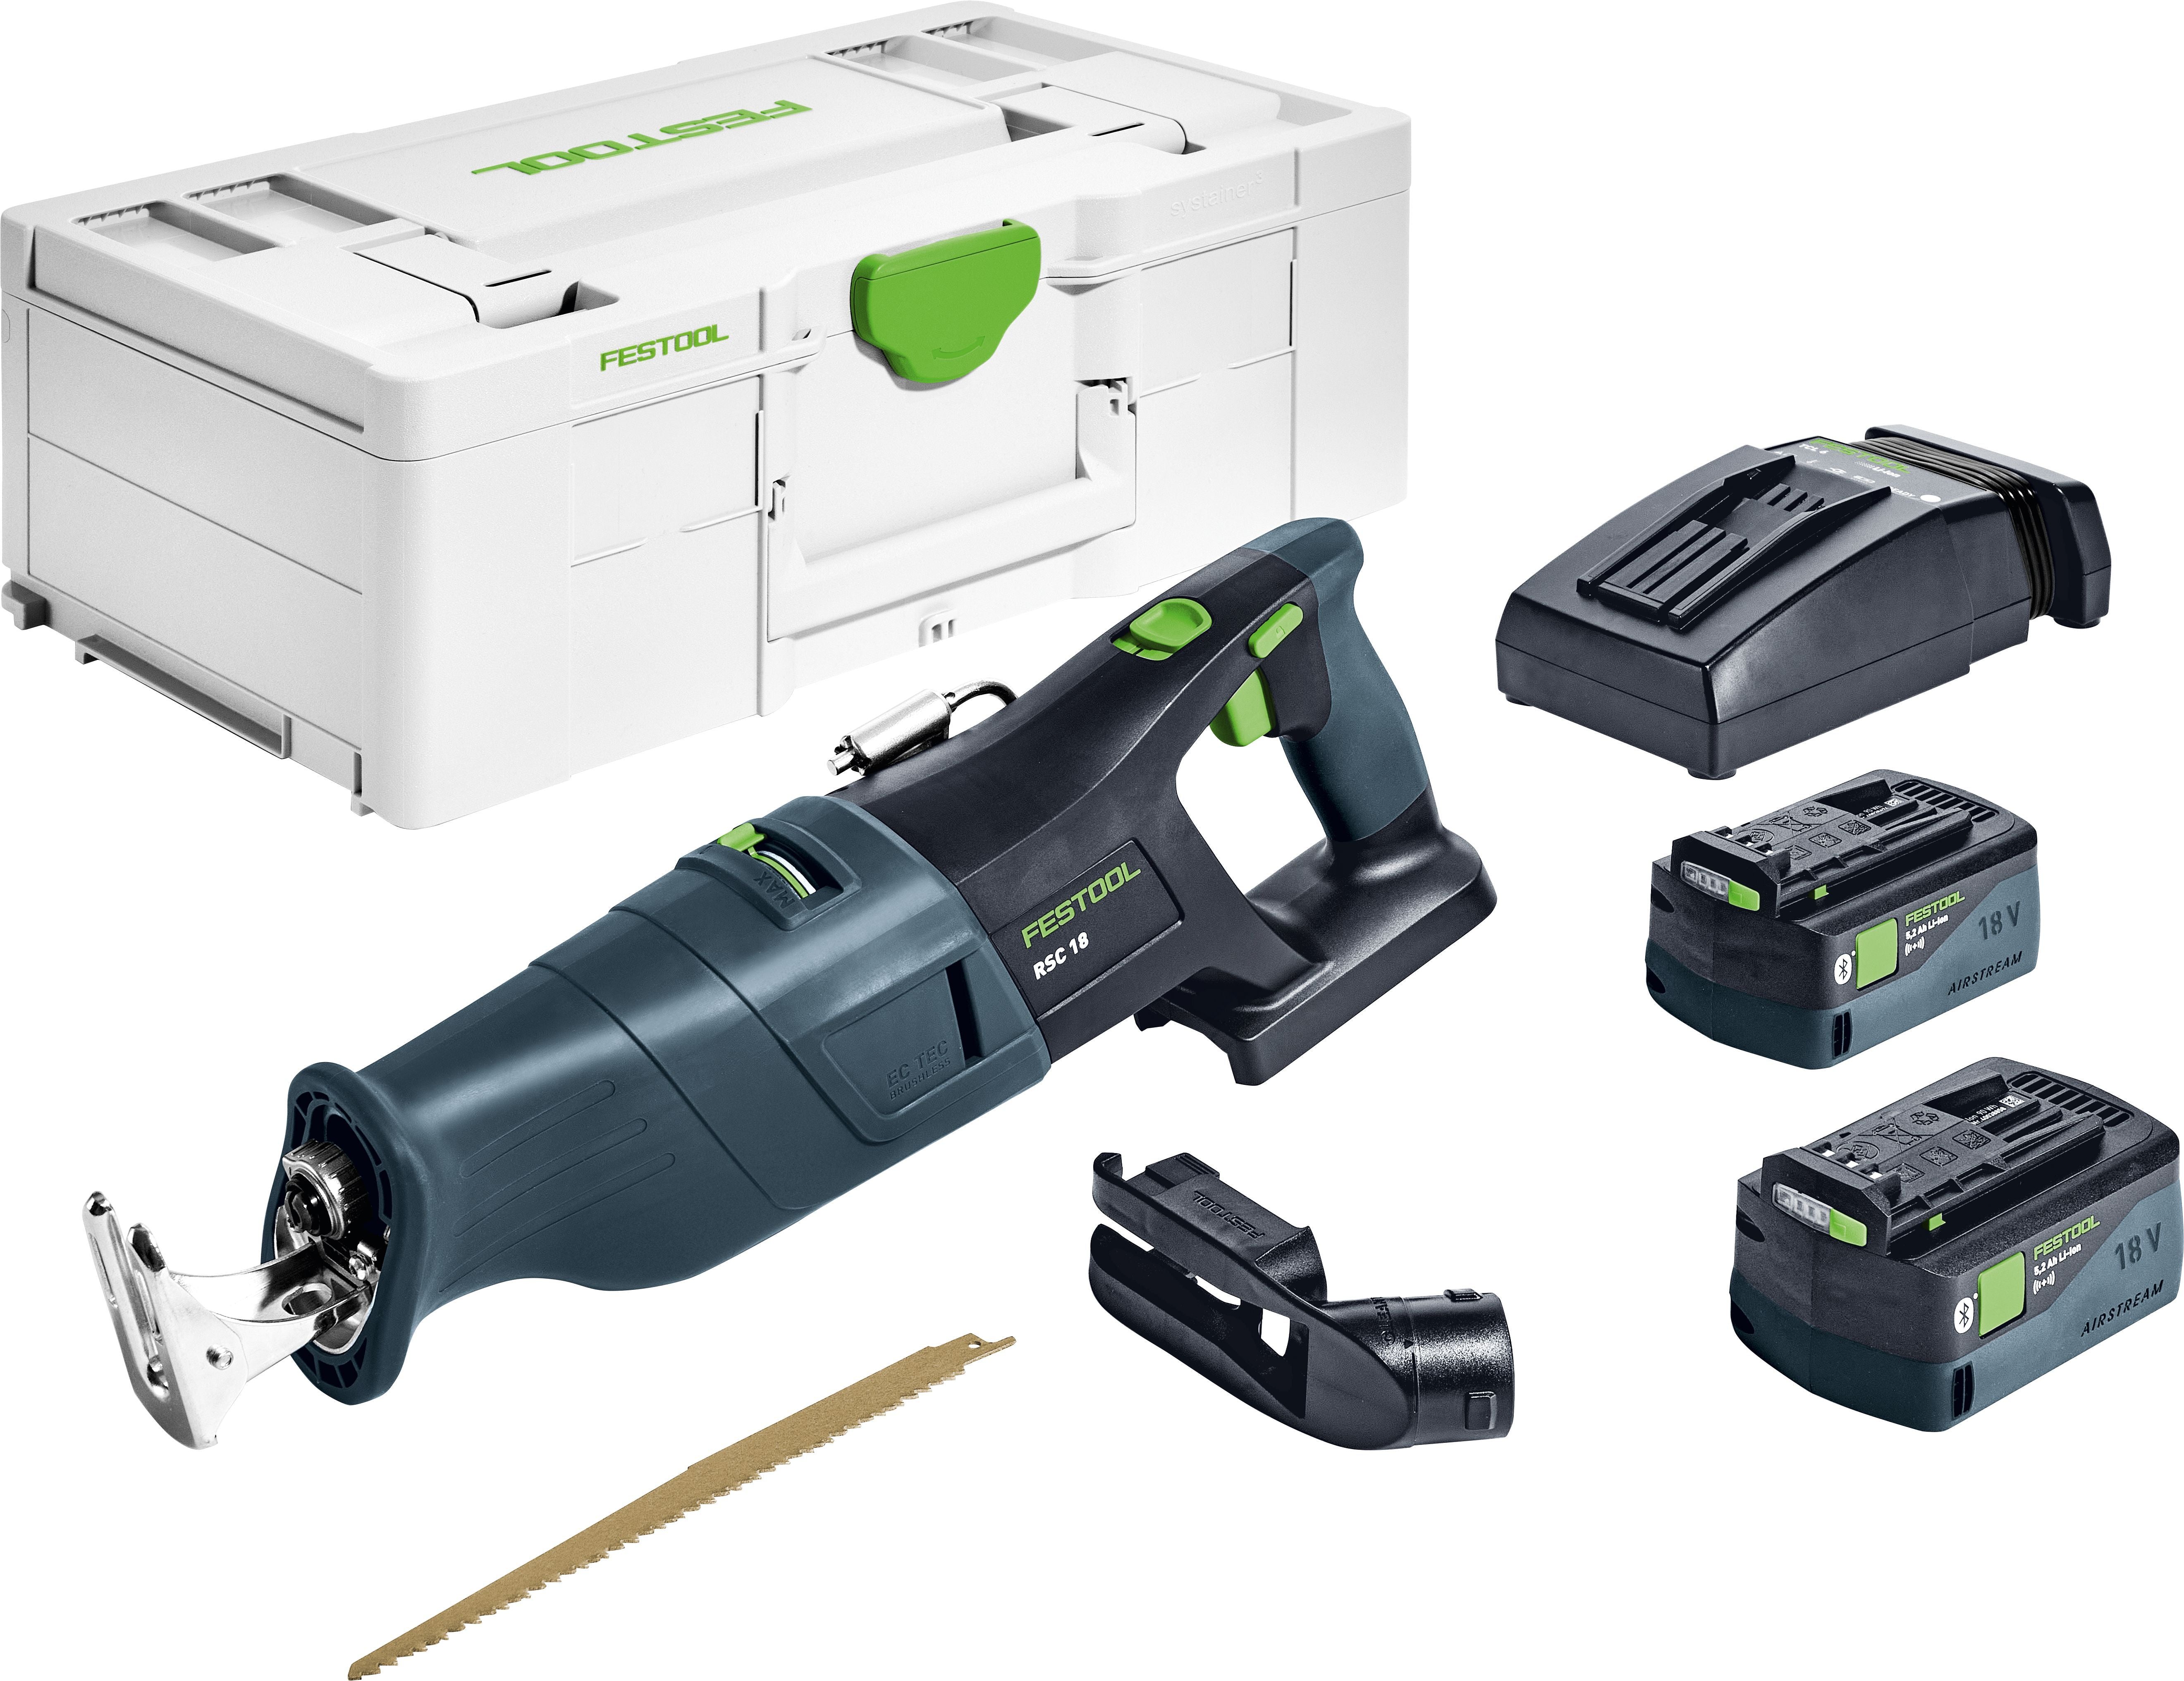 RSC 18 18V Cordless Reciprocating Saw 5.2Ah Set in Systainer Kit 576948 by Festool